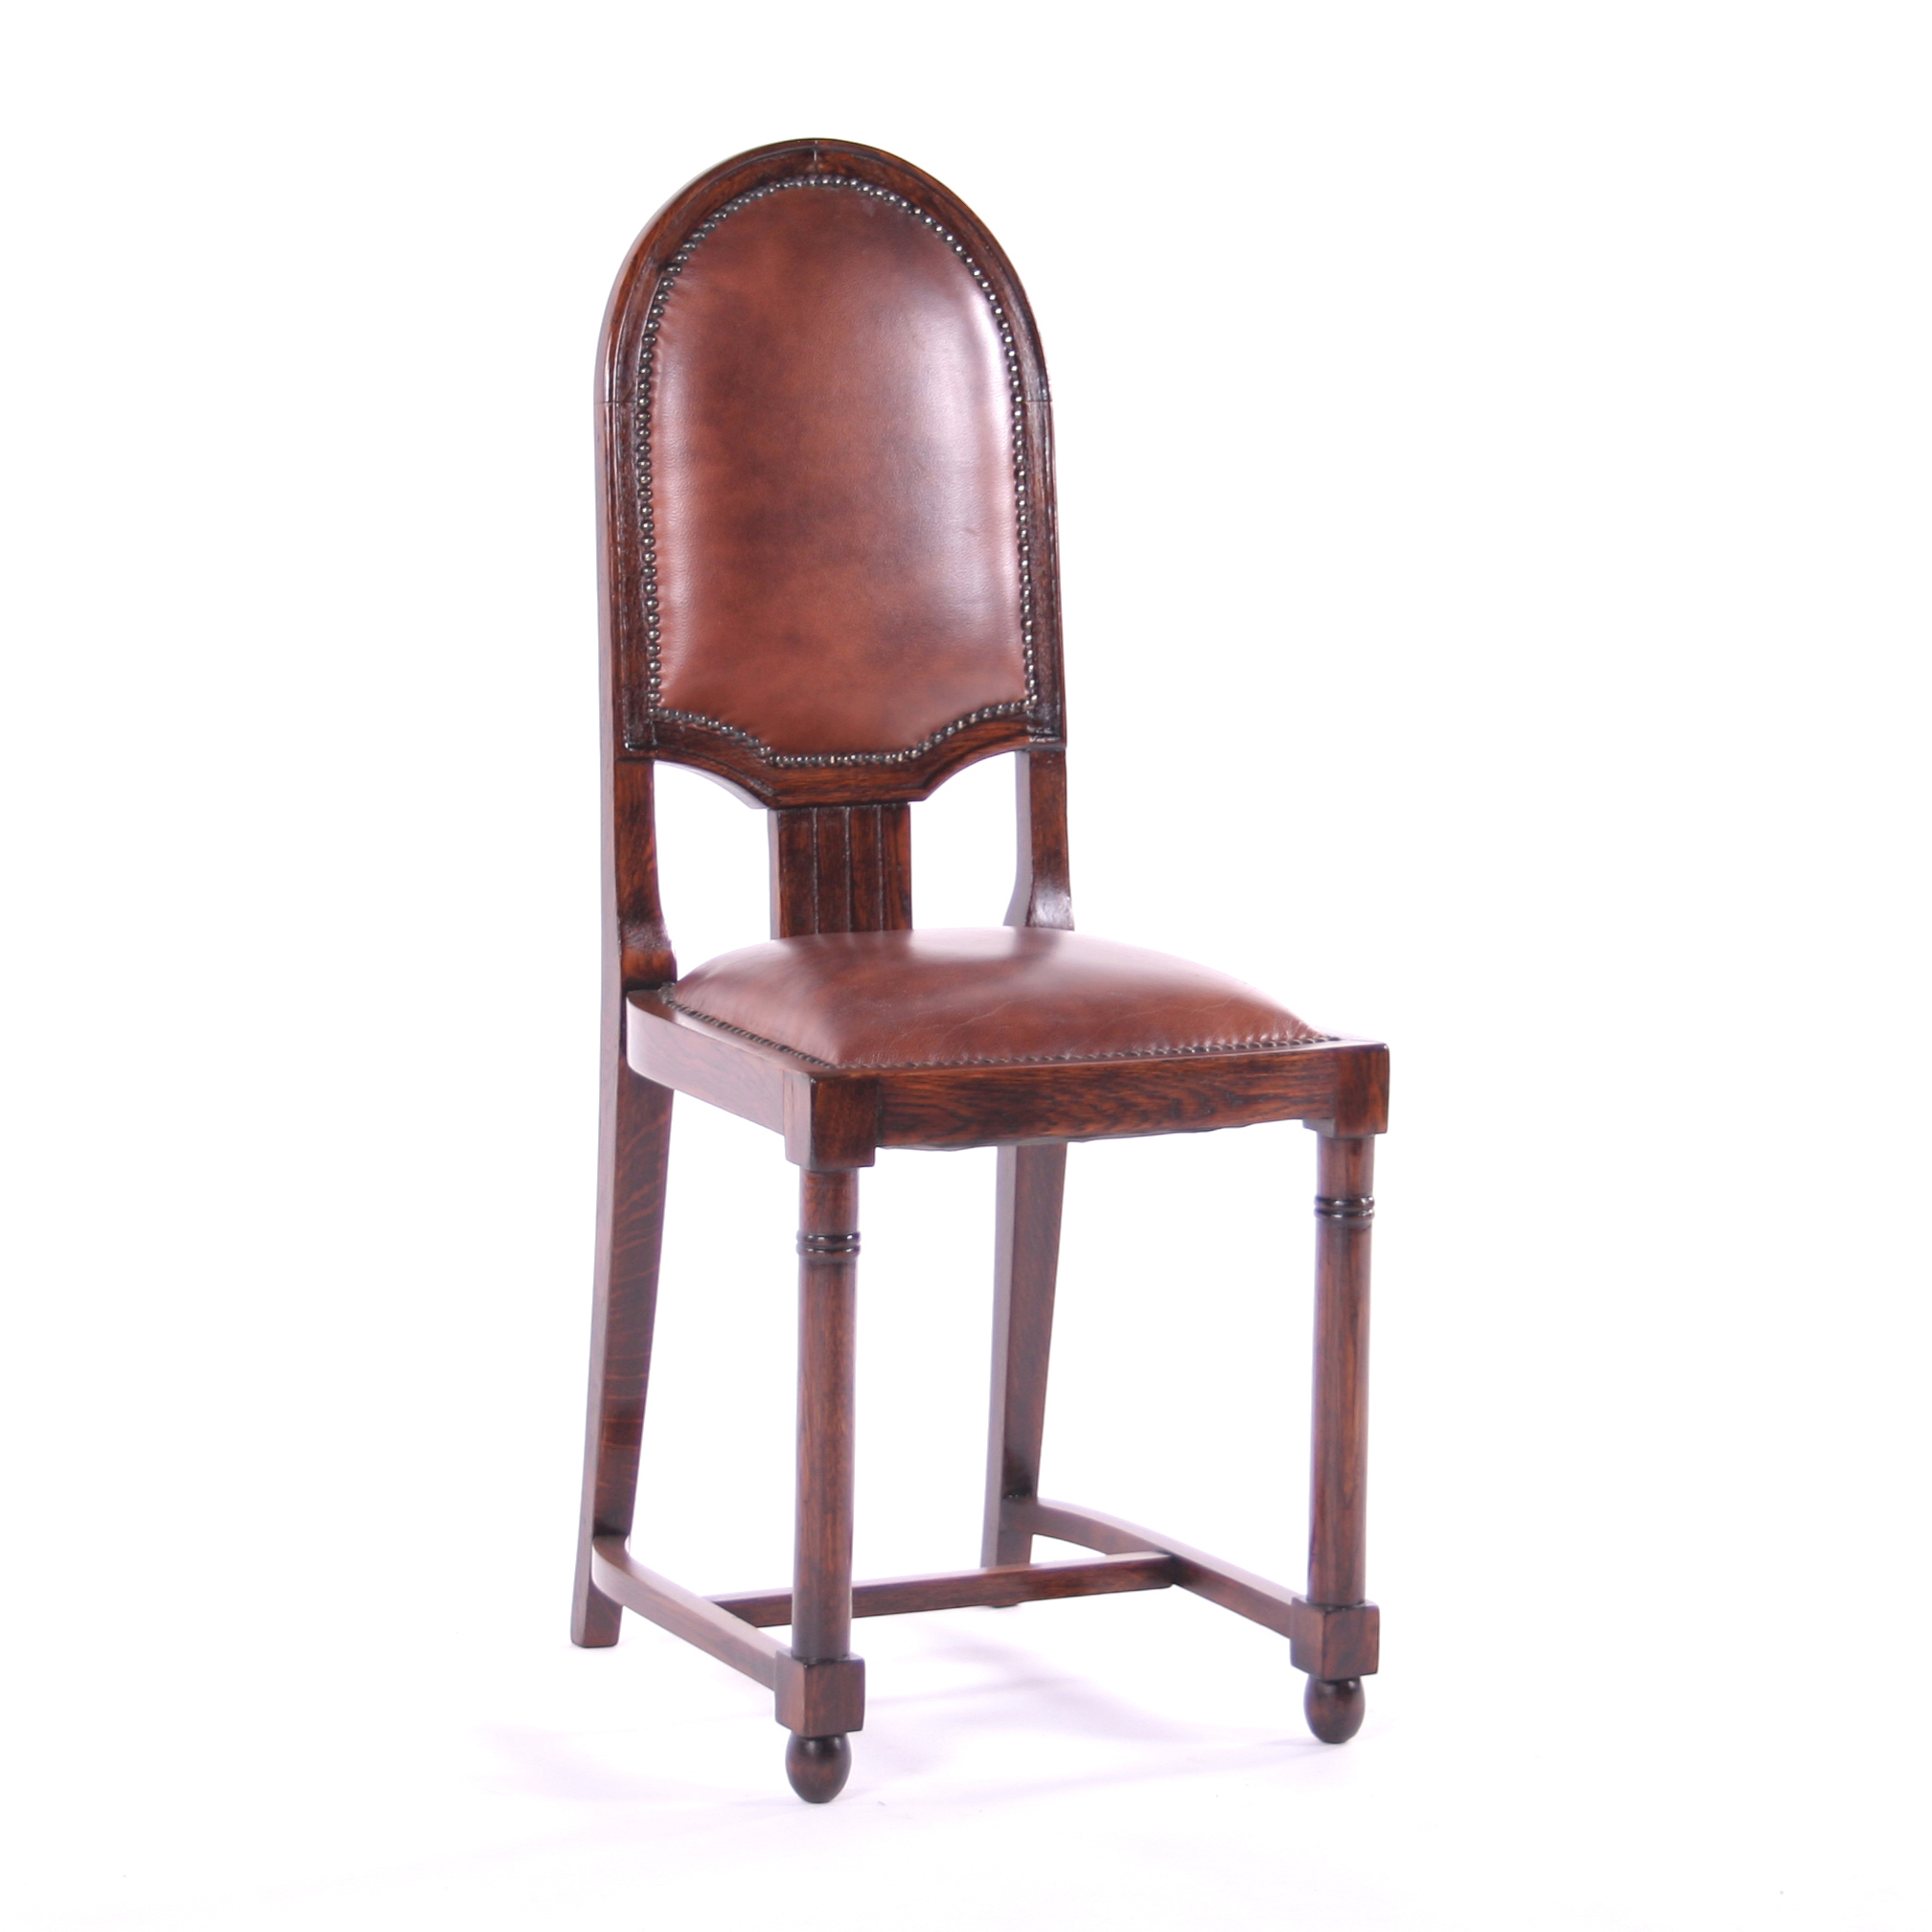 Dining chair Gothic